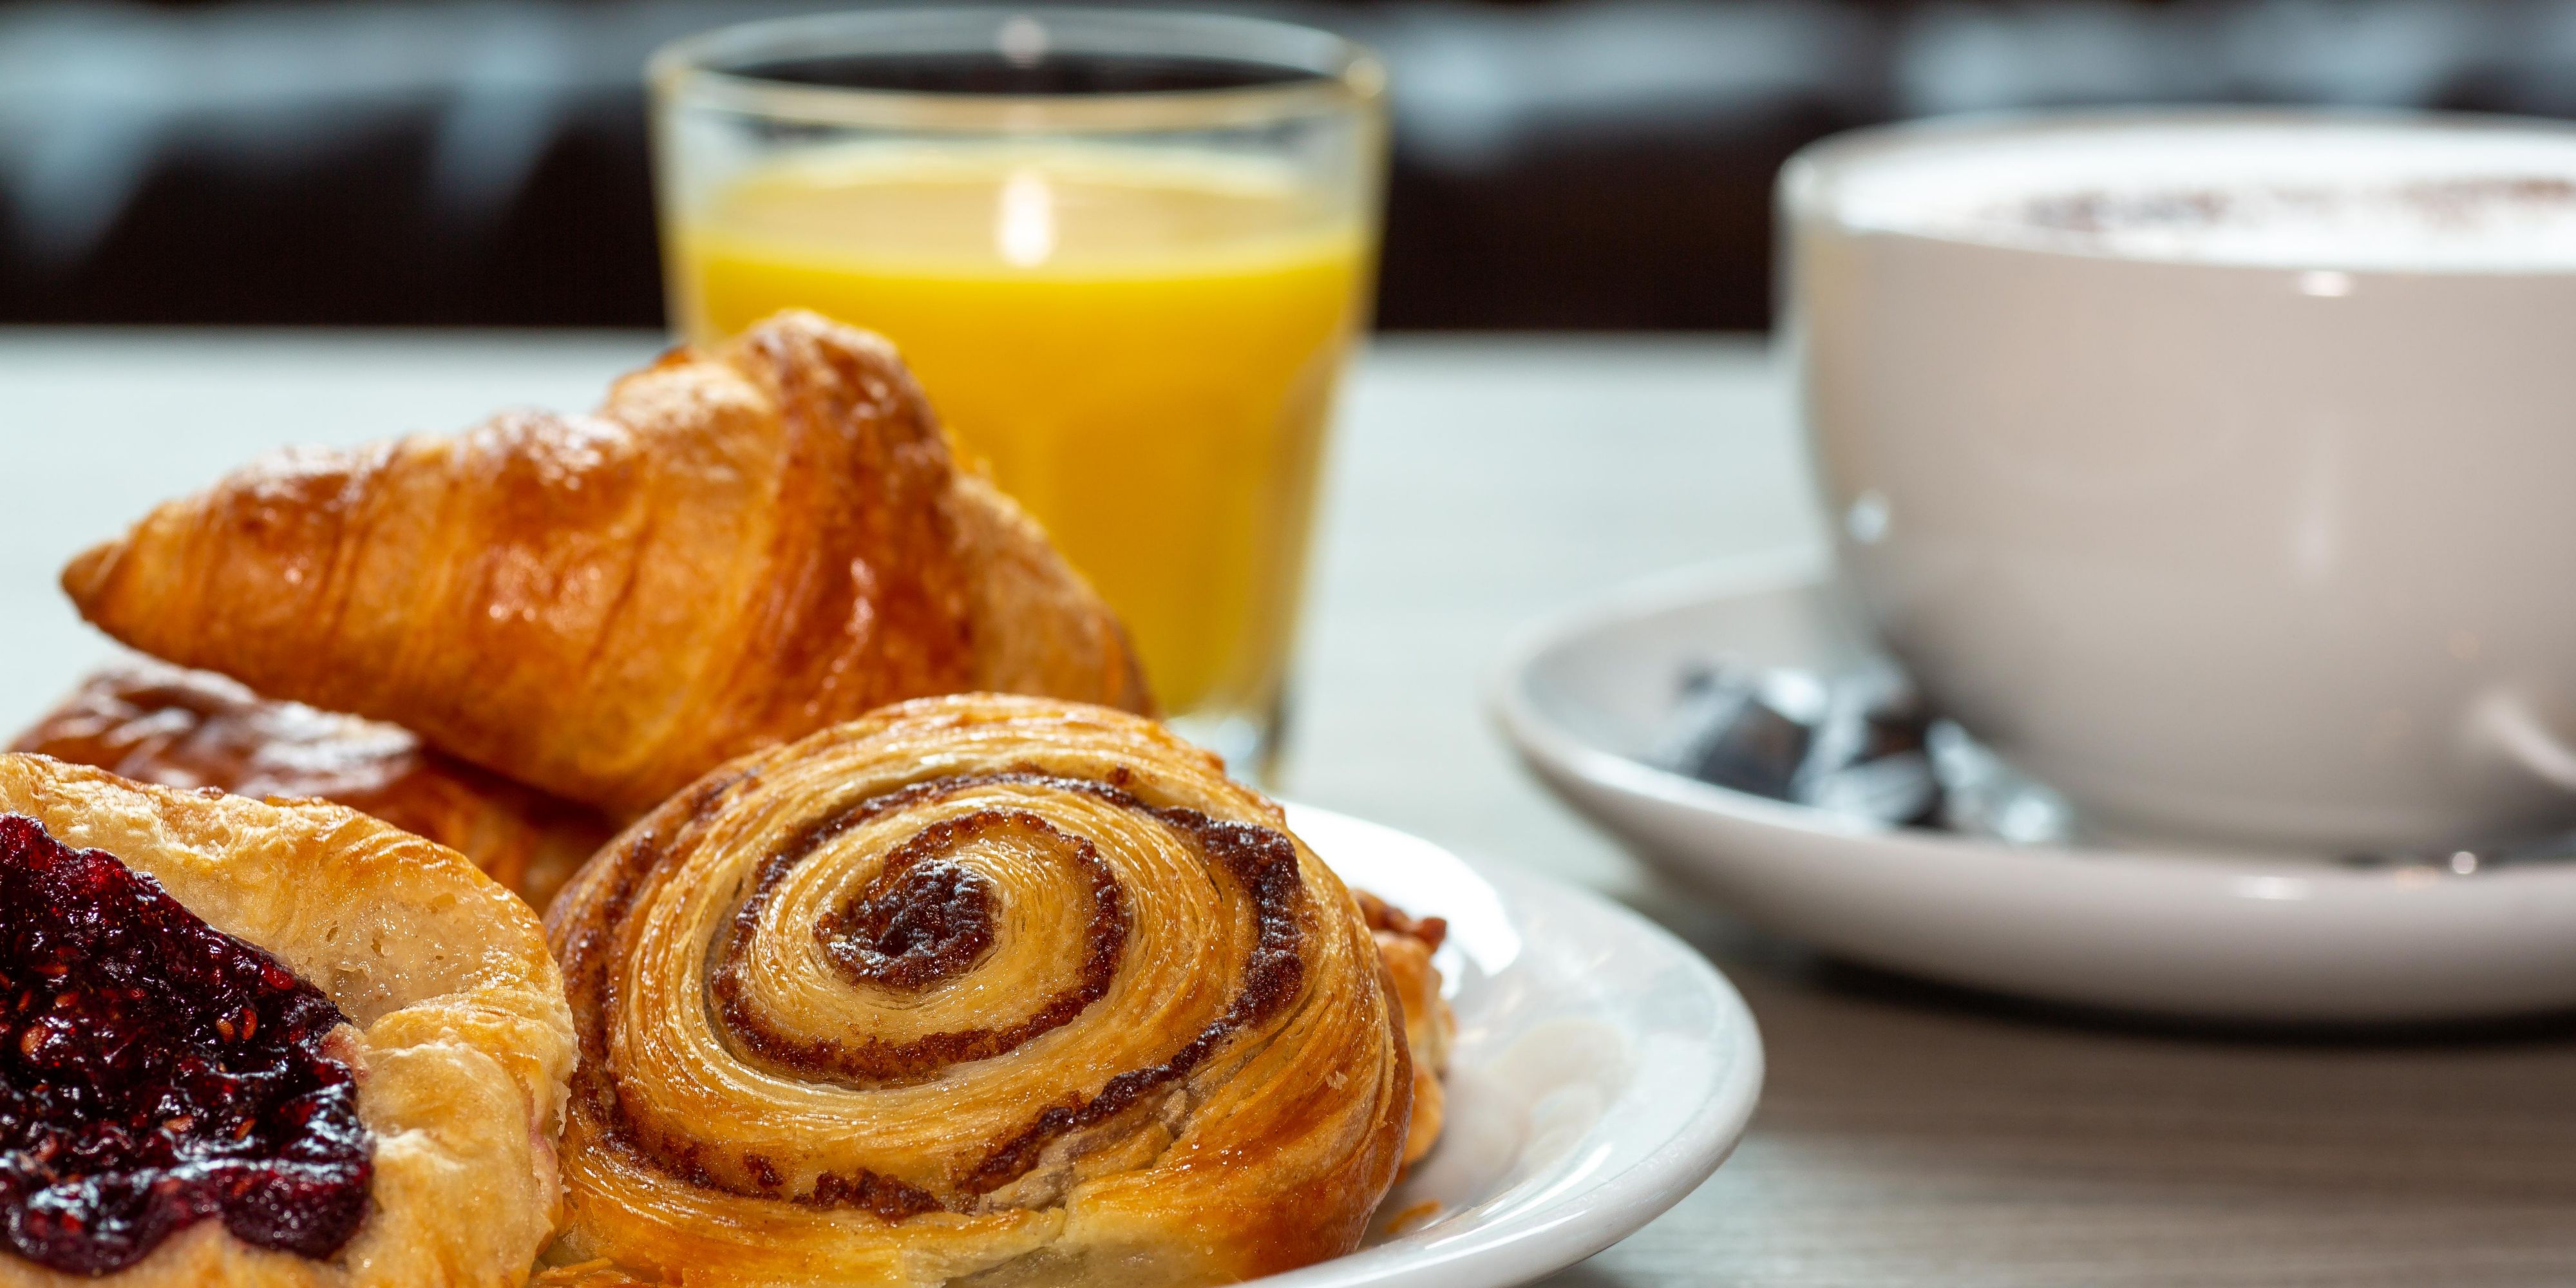 Delicious continental breakfast pastries and drinks